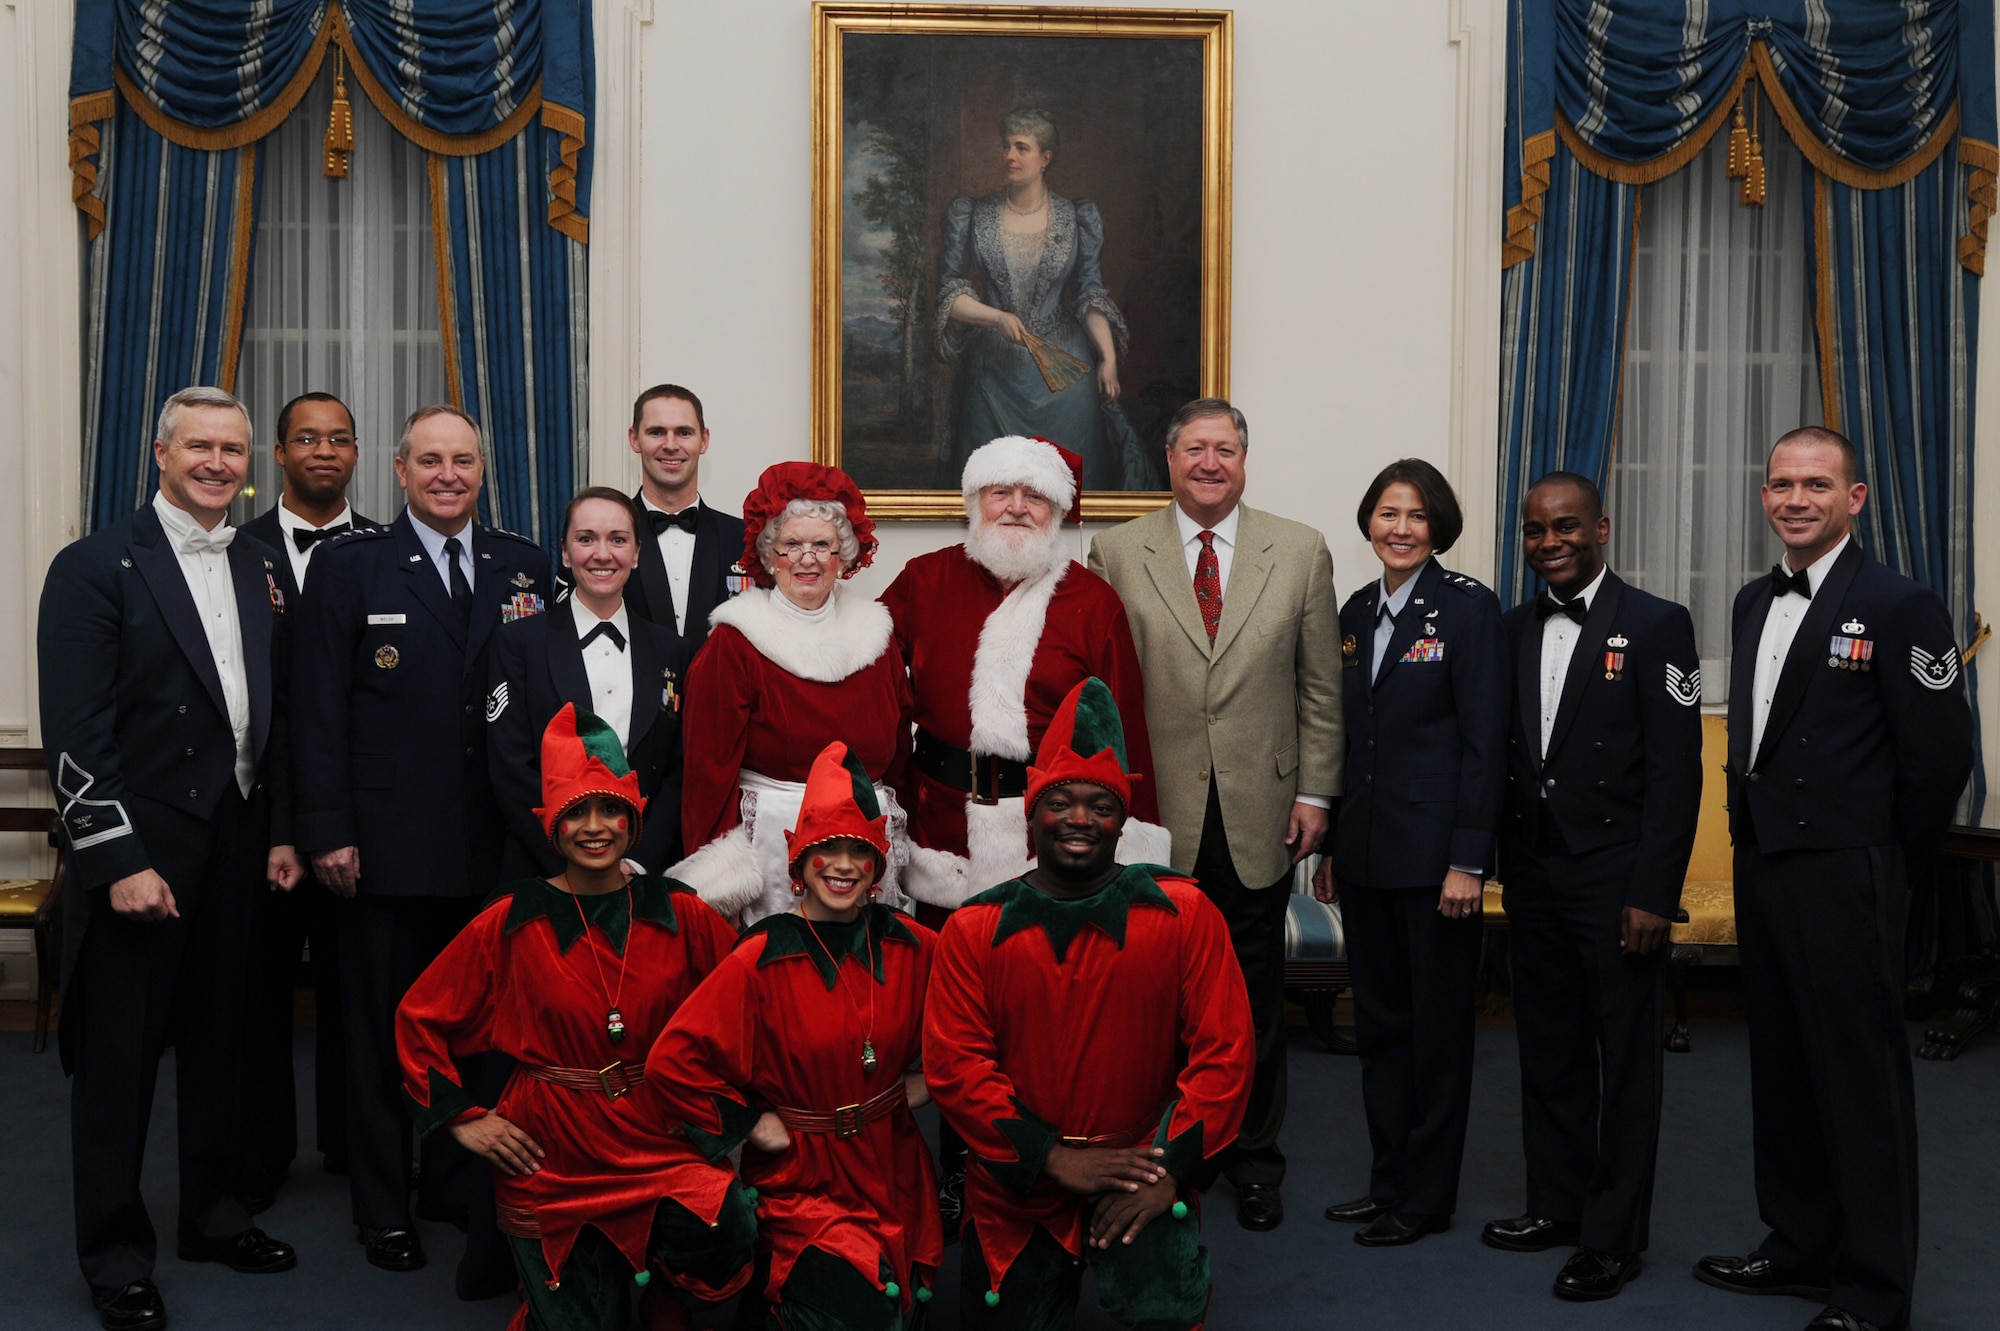 Secretary of the Air Force Michael Donley, Air Force Chief of Staff Gen. Mark A. Welsh III, and Air Force District of Washington commander Maj. Gen. Sharon Dunbar pose with U.S. Air Force Band commander Col. Larry Lang, U.S. Air Force Band members, Mr. and Mrs. Claus and elves after the band’s holiday concert at the Daughters of the American Revolution Constitution Hall in Washington, D.C., Dec. 9, 2012. (U.S. Air Force photo/Airman 1st Class Aaron Stout)